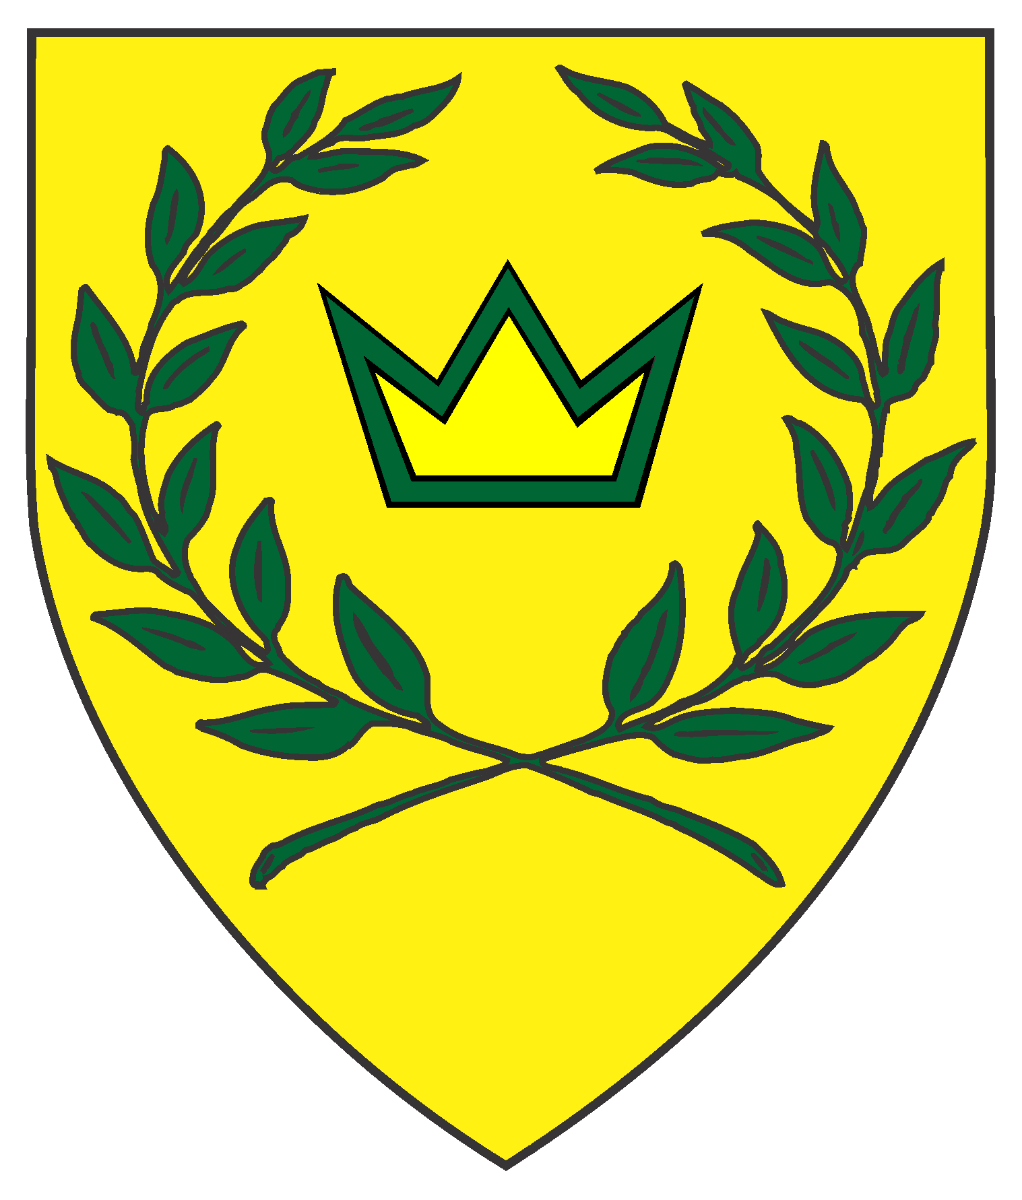 Arms of the West Kingdom - Or, a Laurel wreath vert